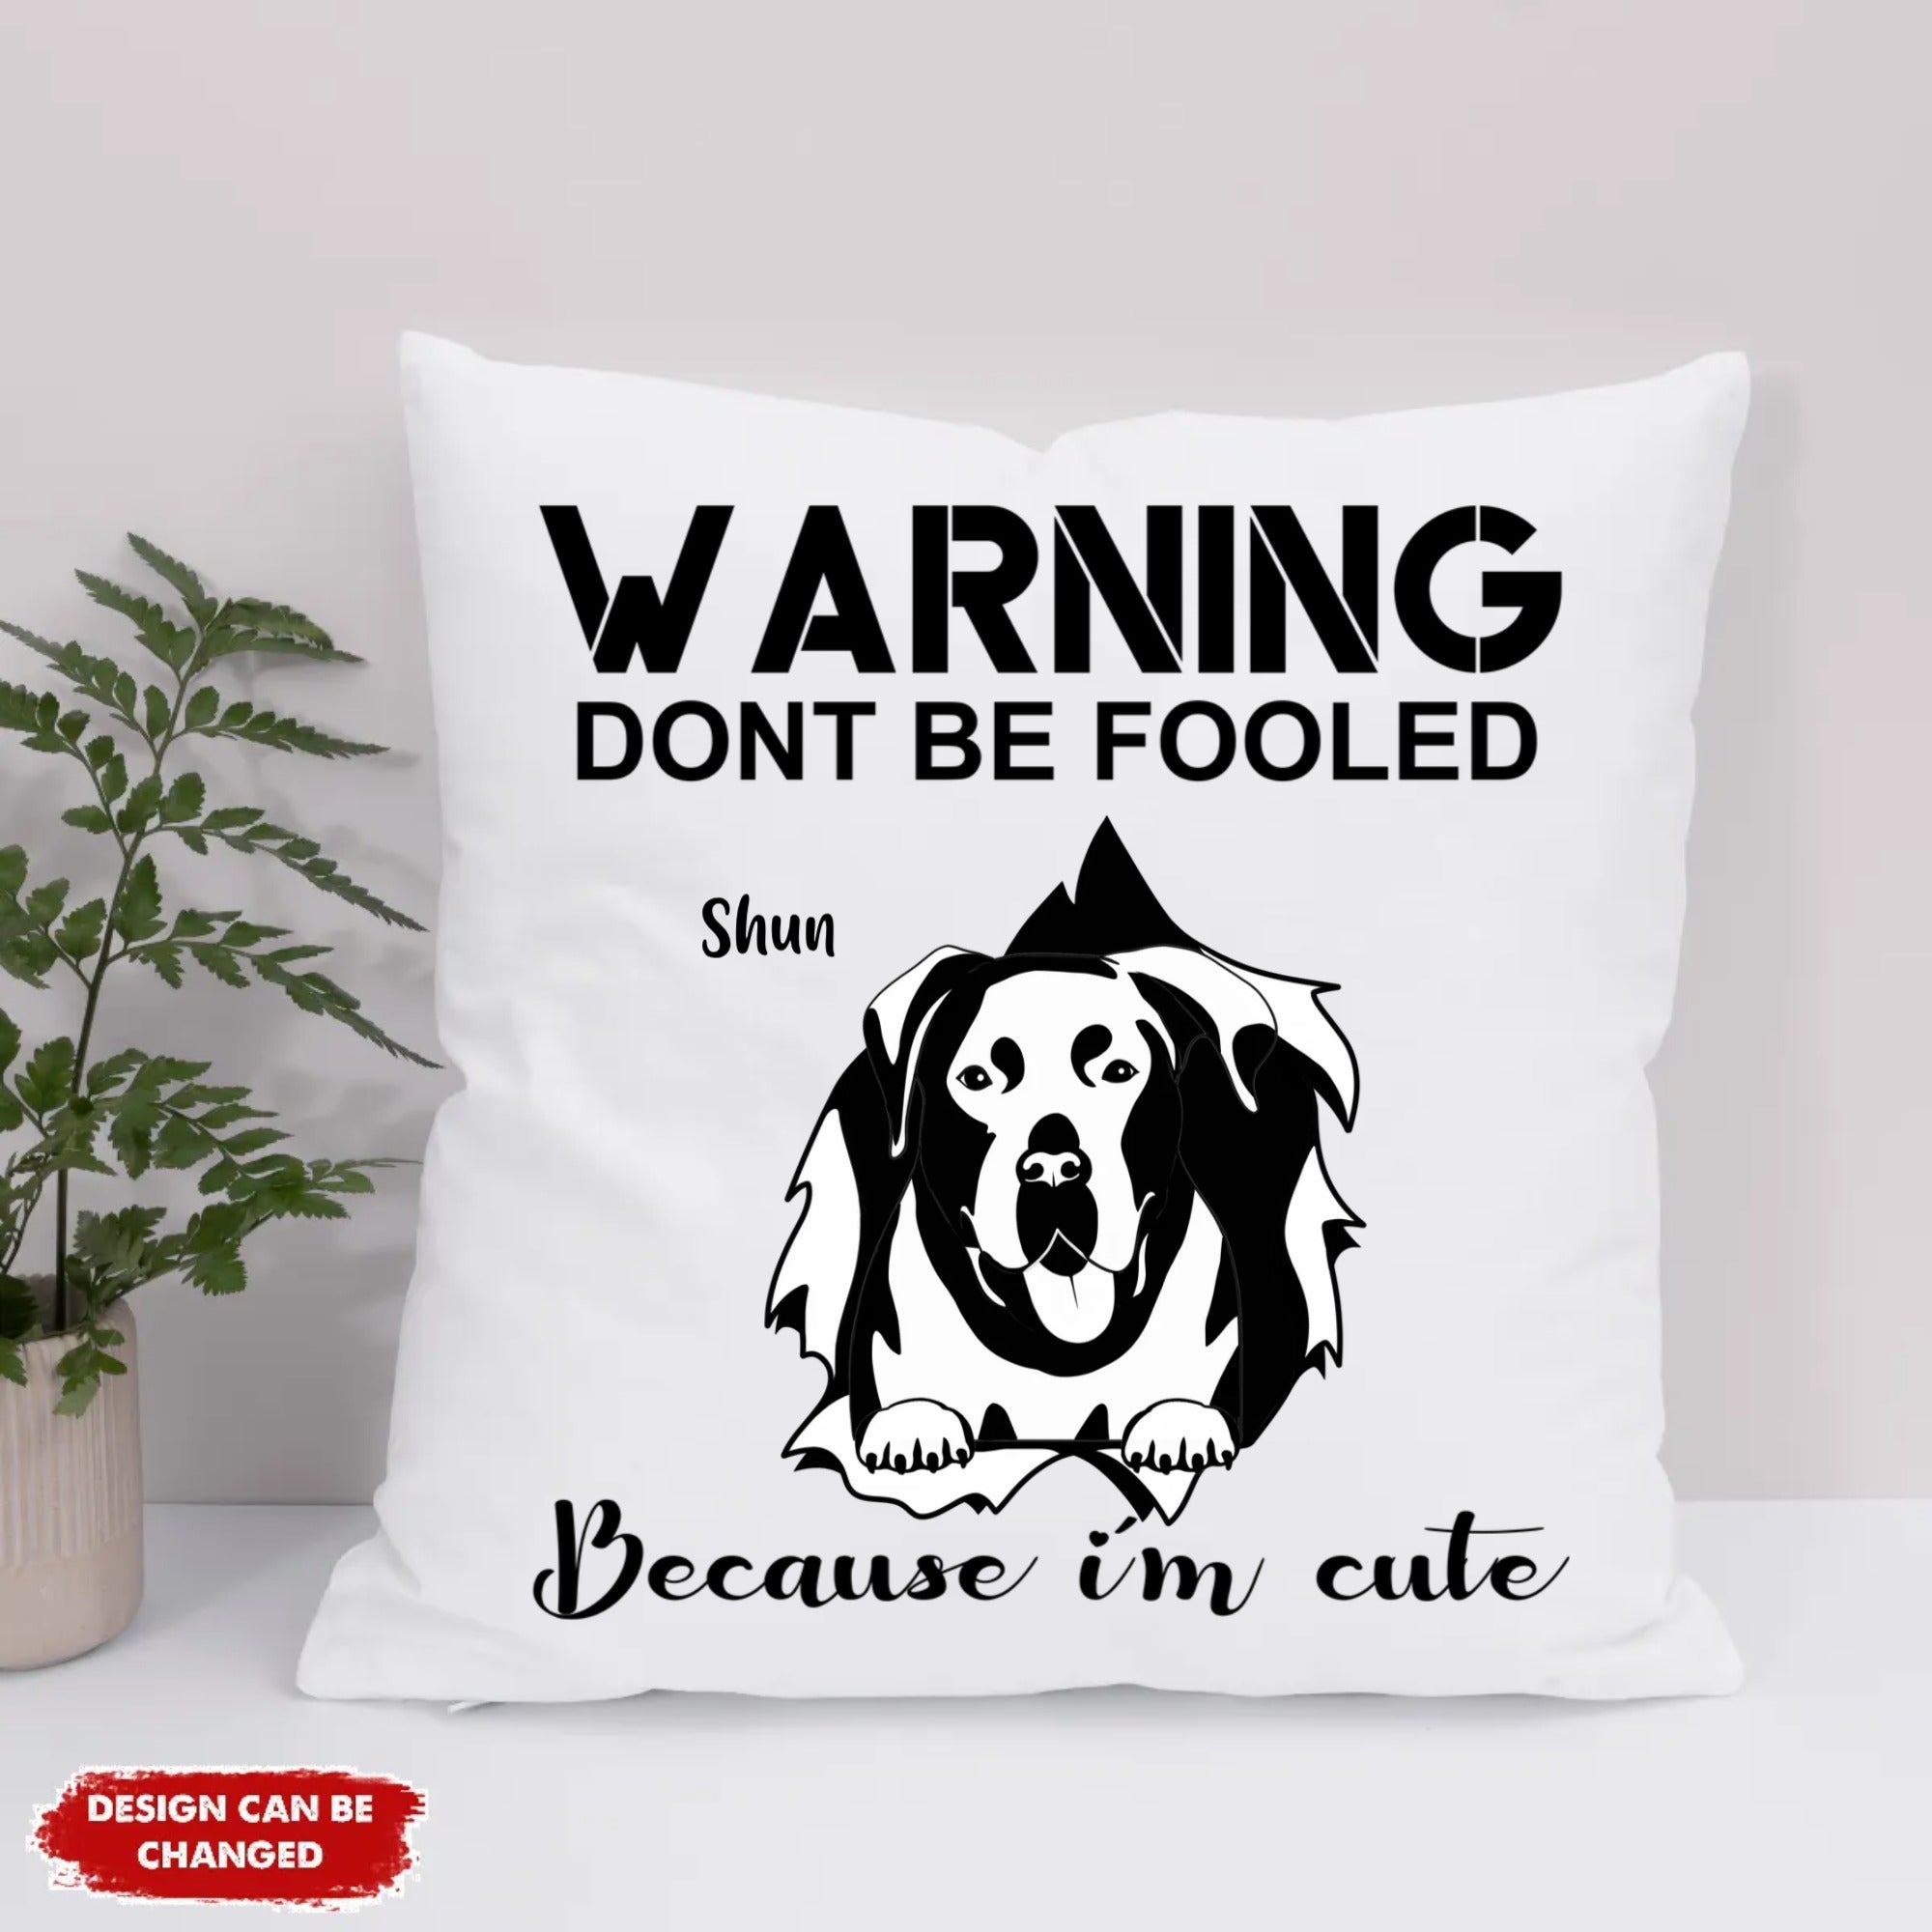 Eco Pillow Artwork - Warning dont be fooled because we are cute - Dogs frontal black/white